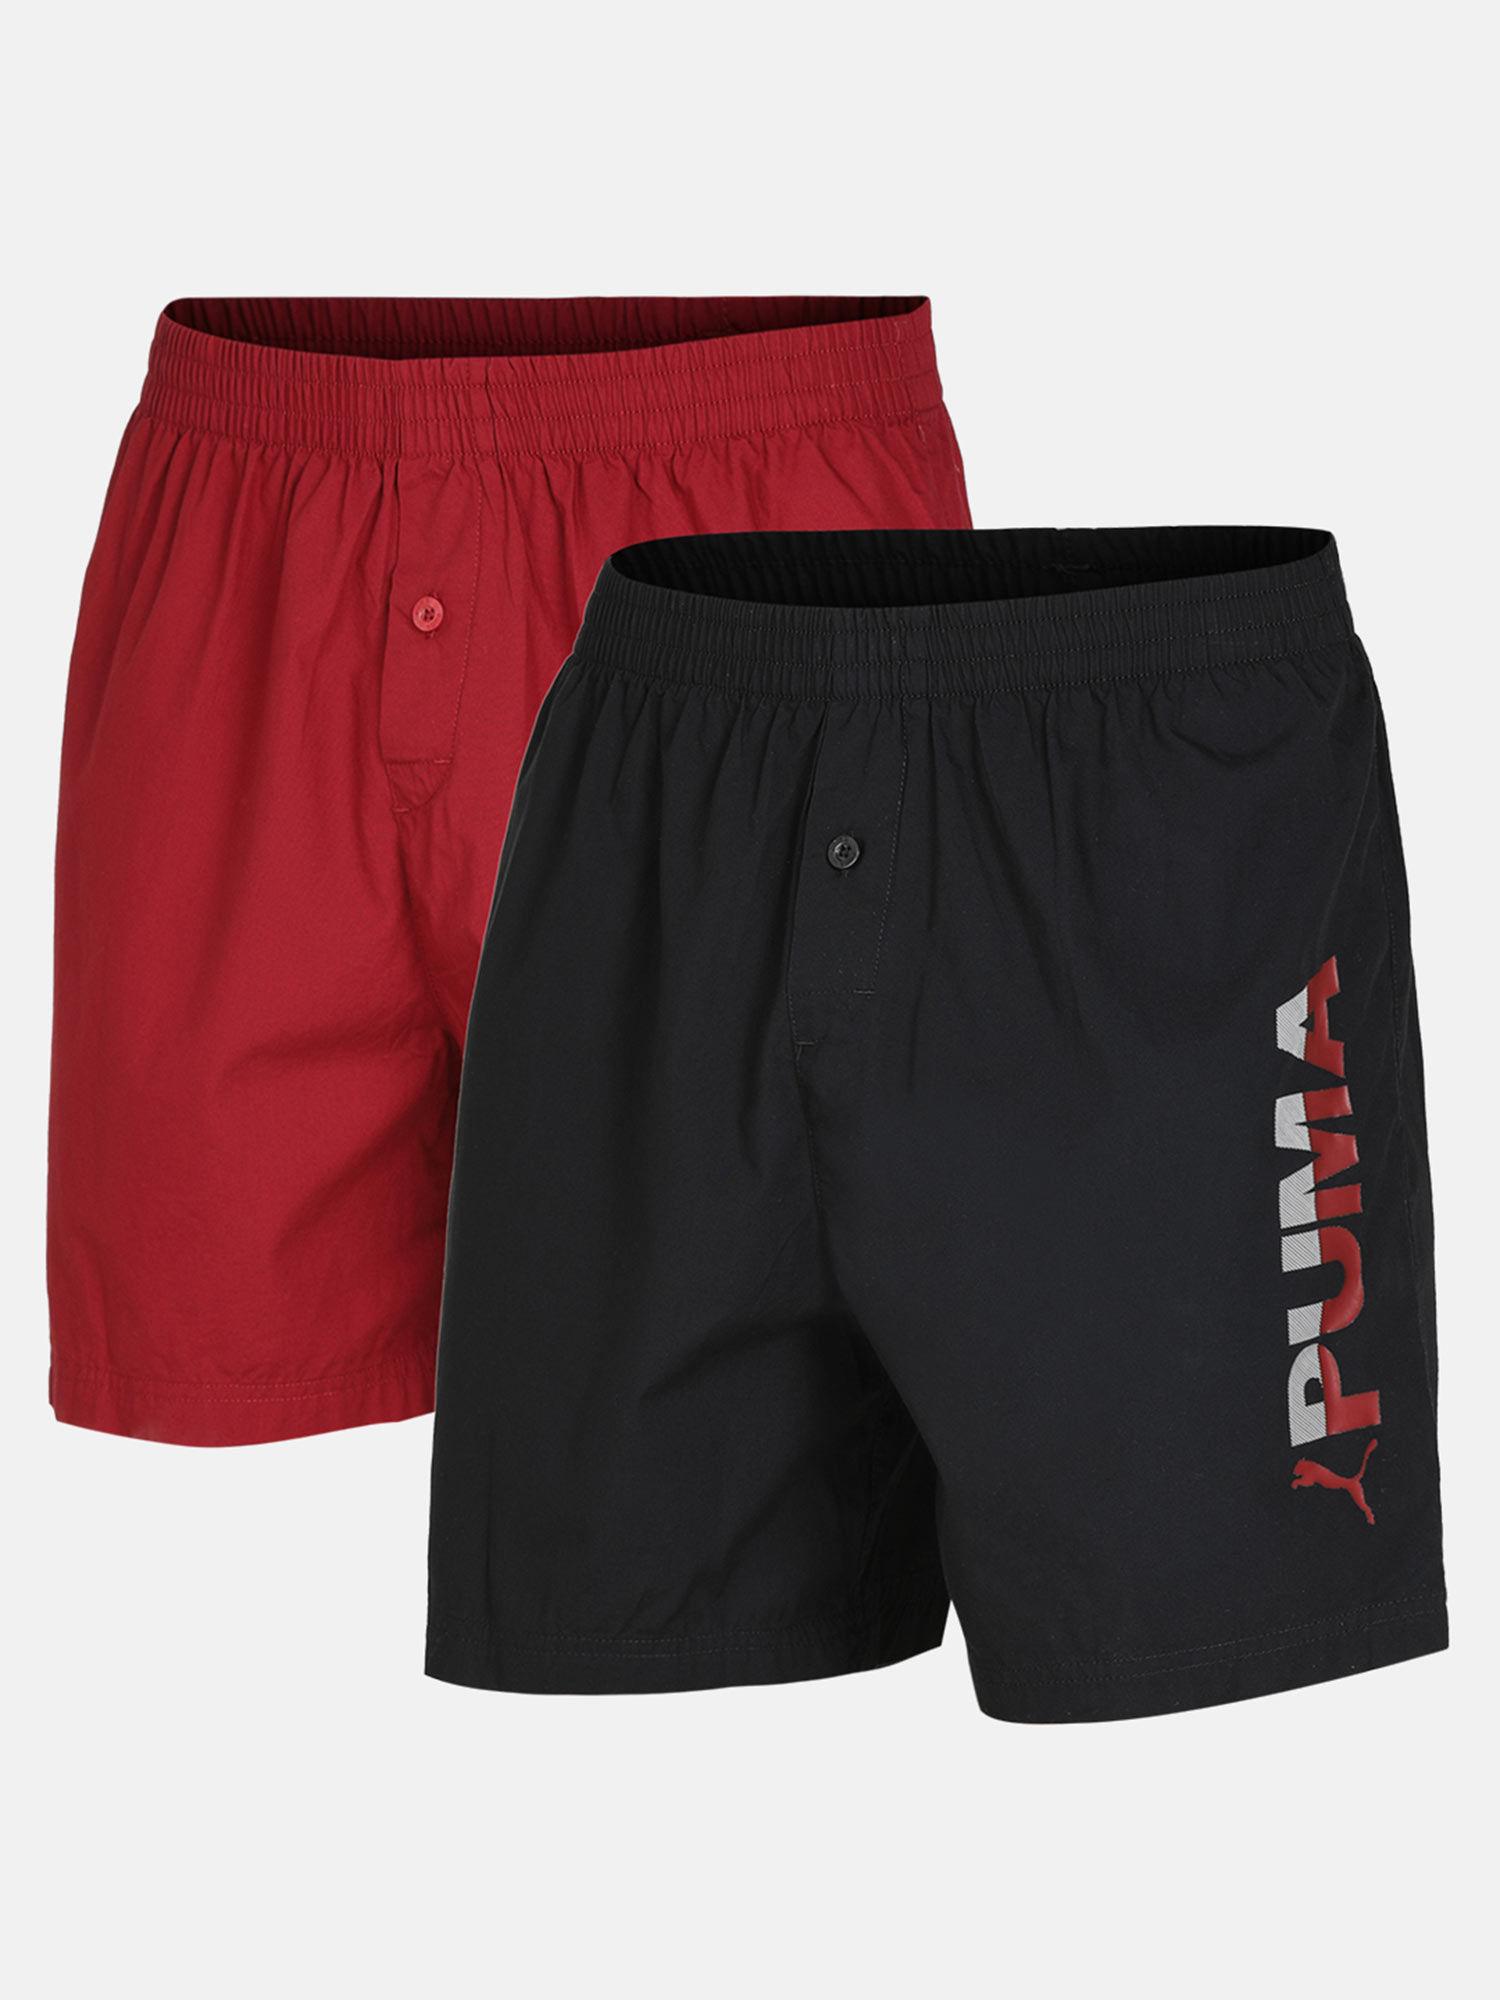 basic black & red woven boxers (pack of 2)